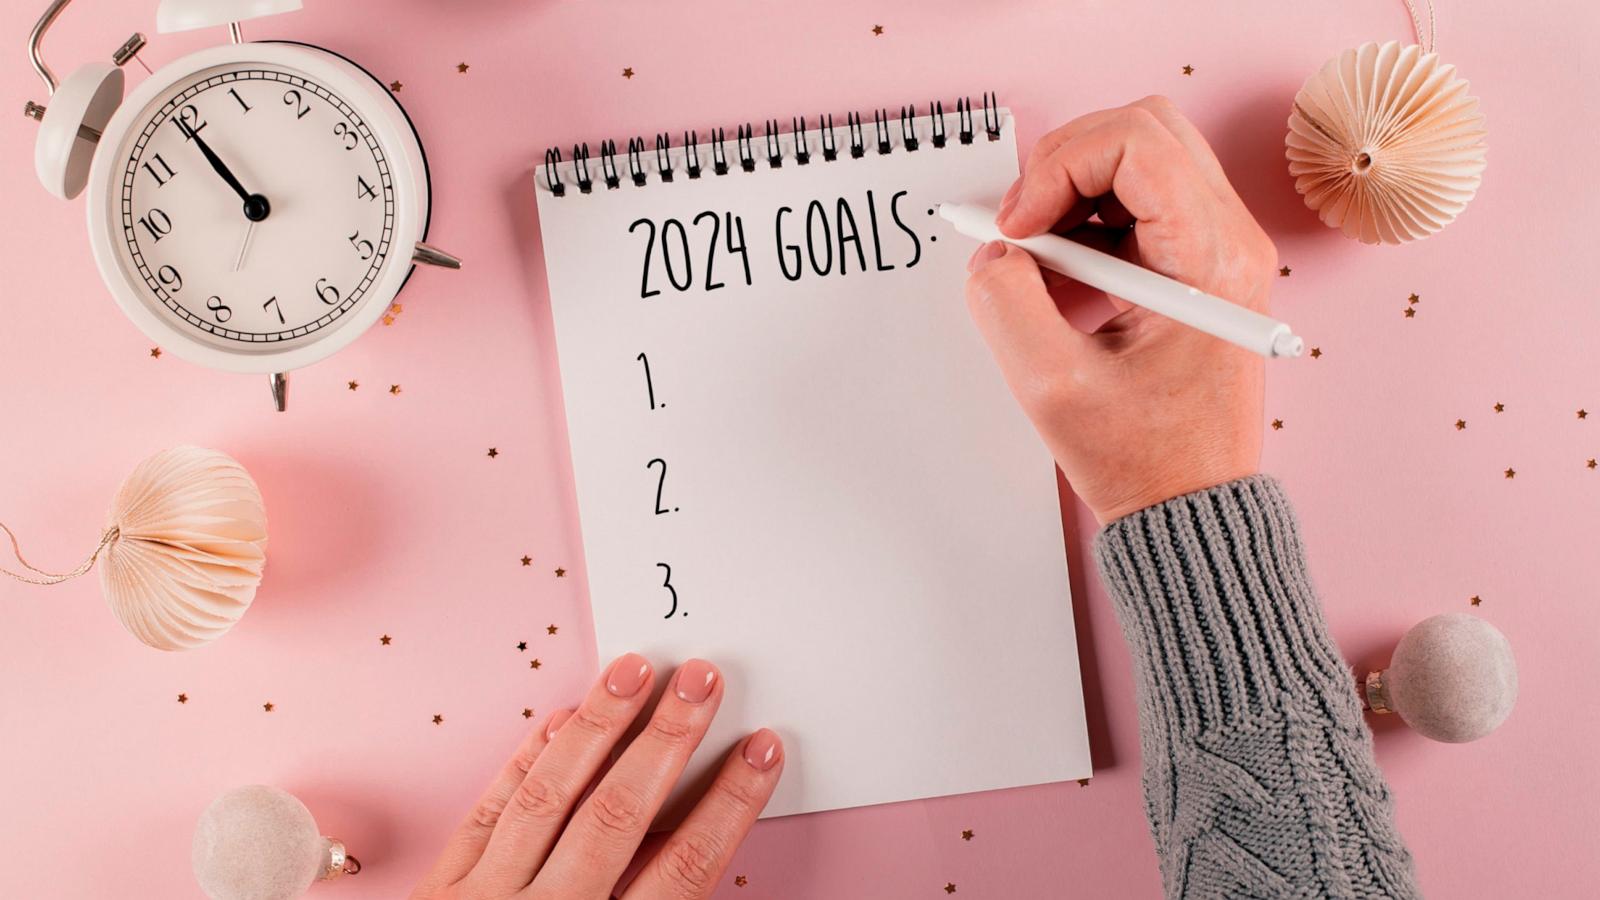 These 'TikTok Made Me Buy It' Items Help You Keep New Year's Resolutions